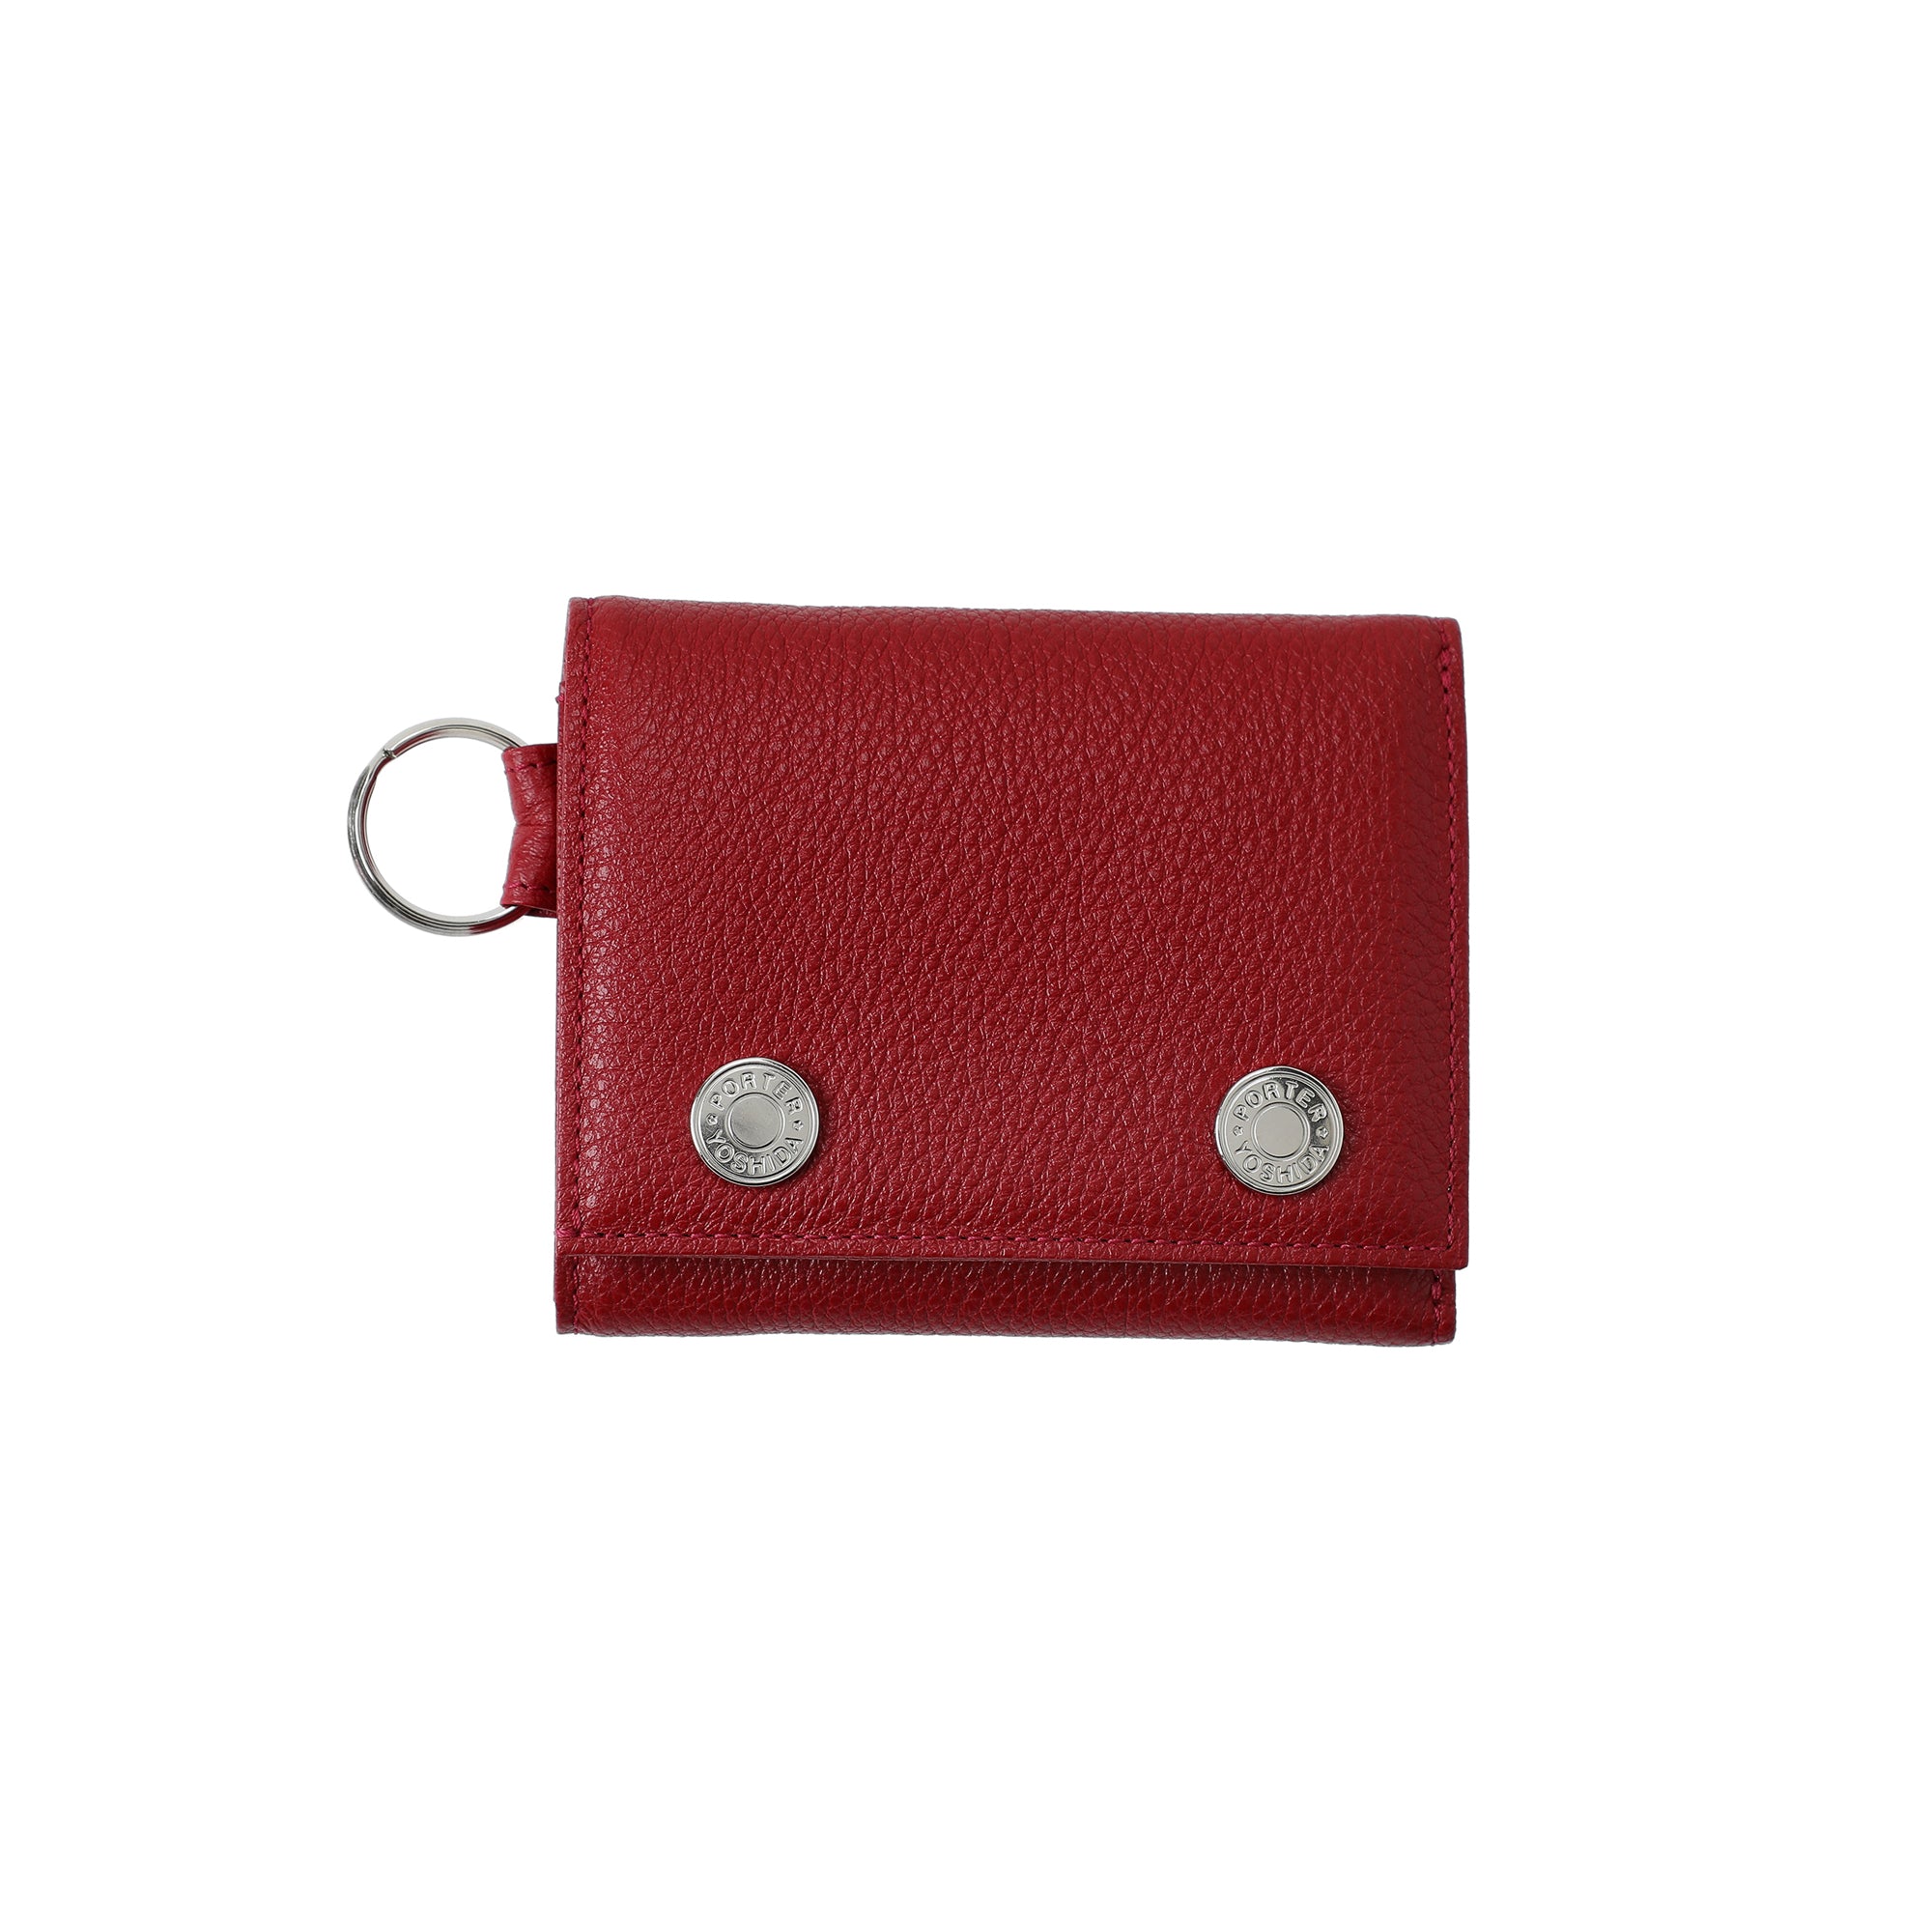 PORTER - Shrink Tri Purse - (Red) view 2